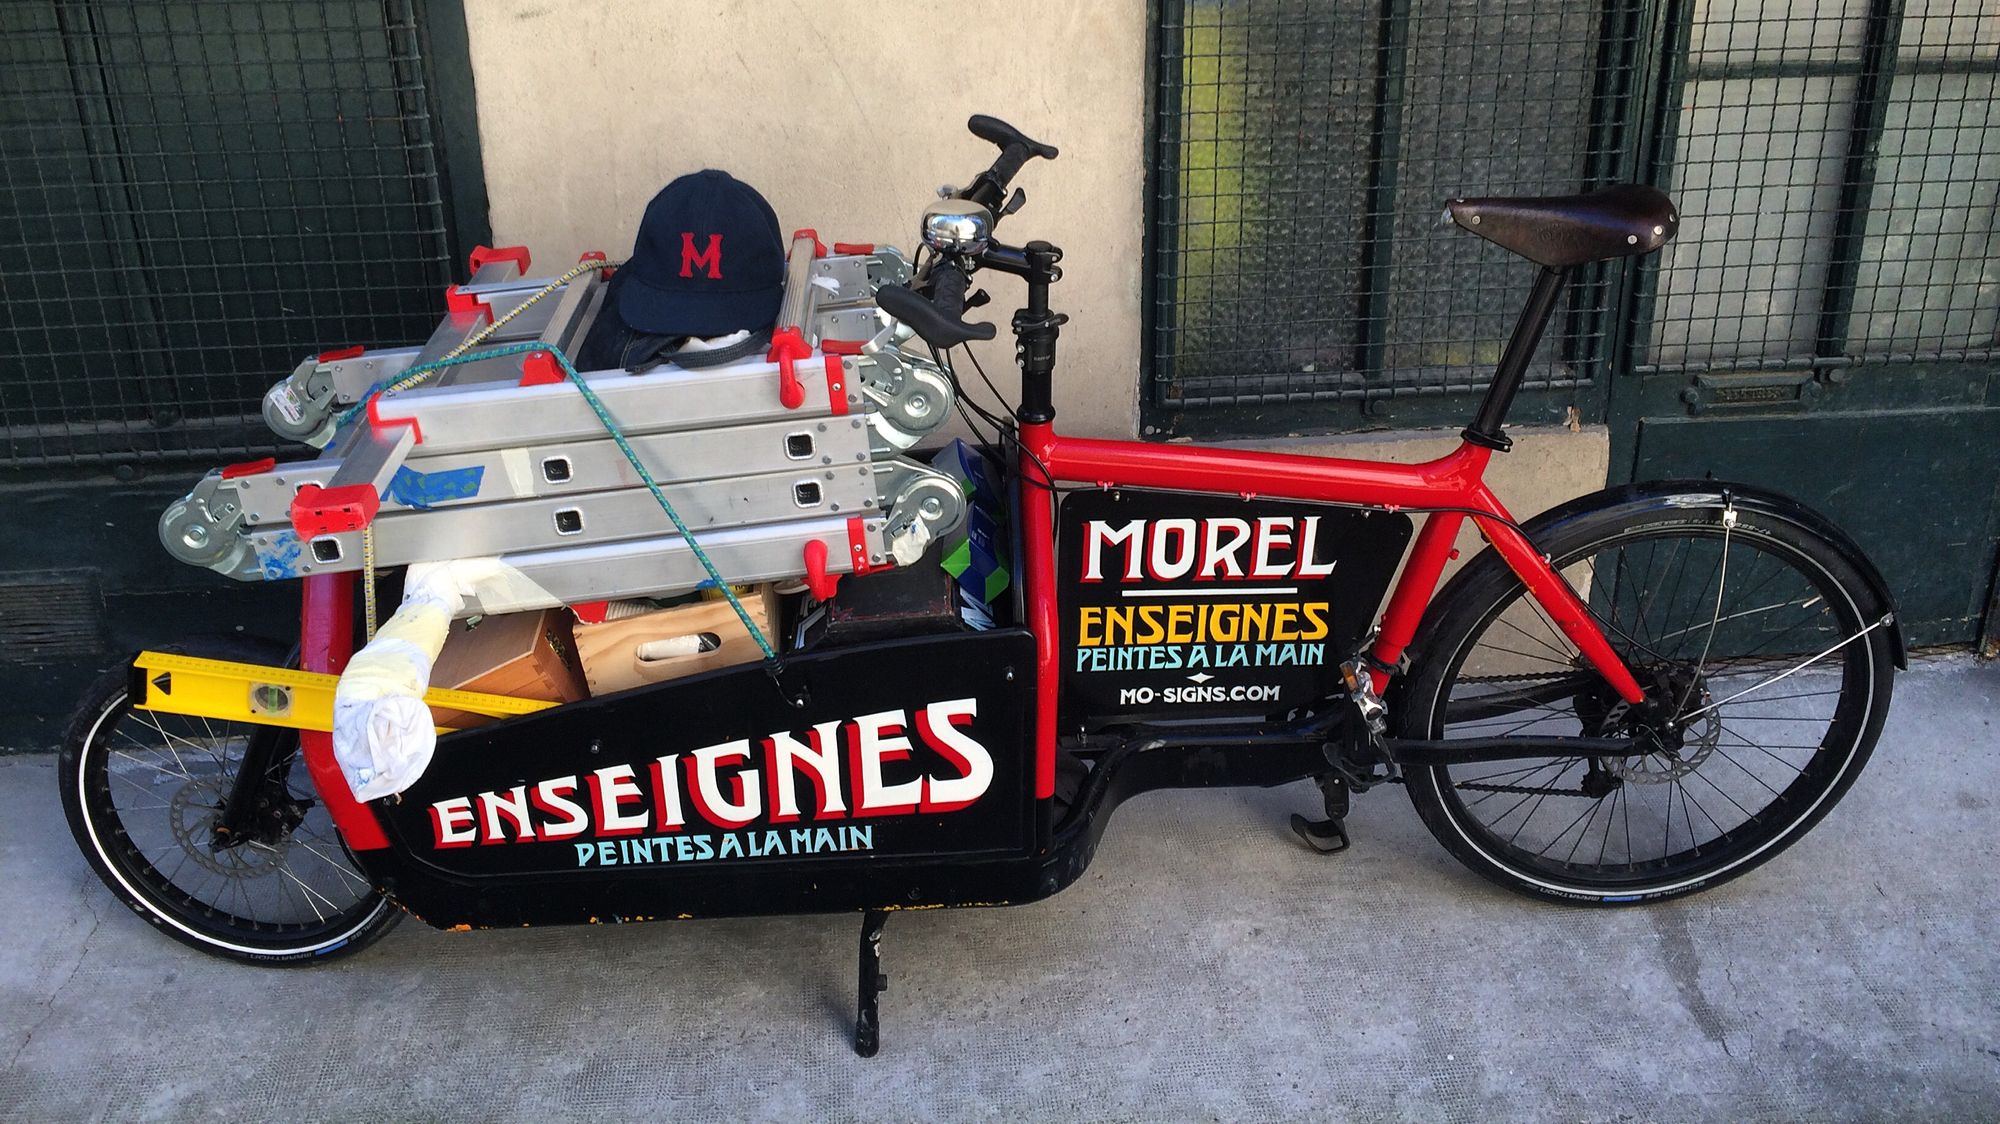 Cargo bike with painted signs on it.